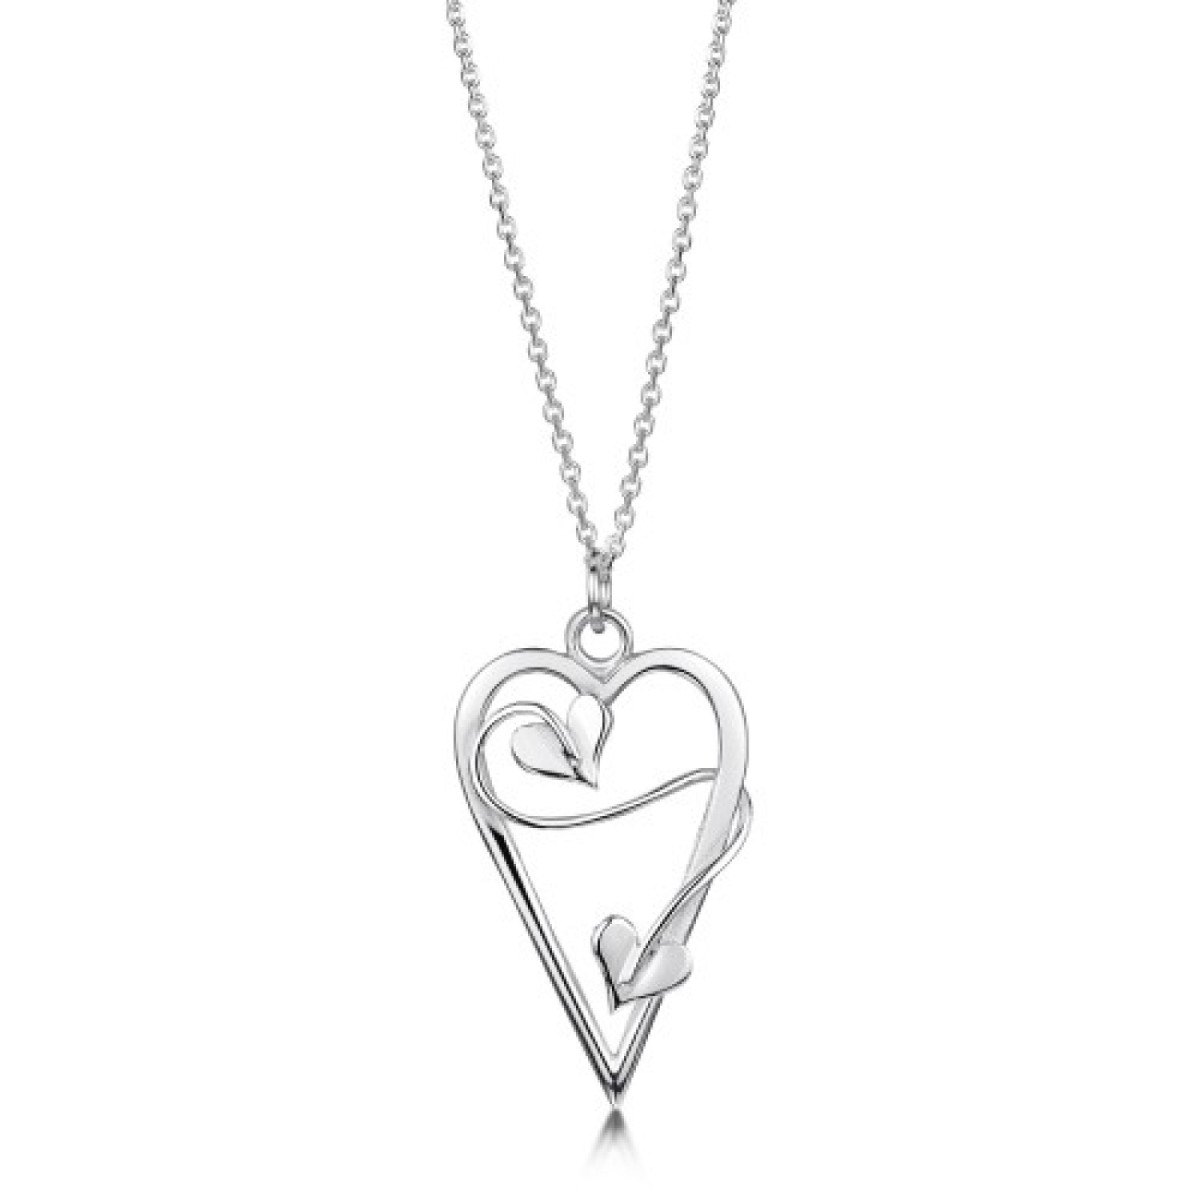 Sterling Silver Celtic Knot Entwined Heart Necklace - Moonlight Mysteries